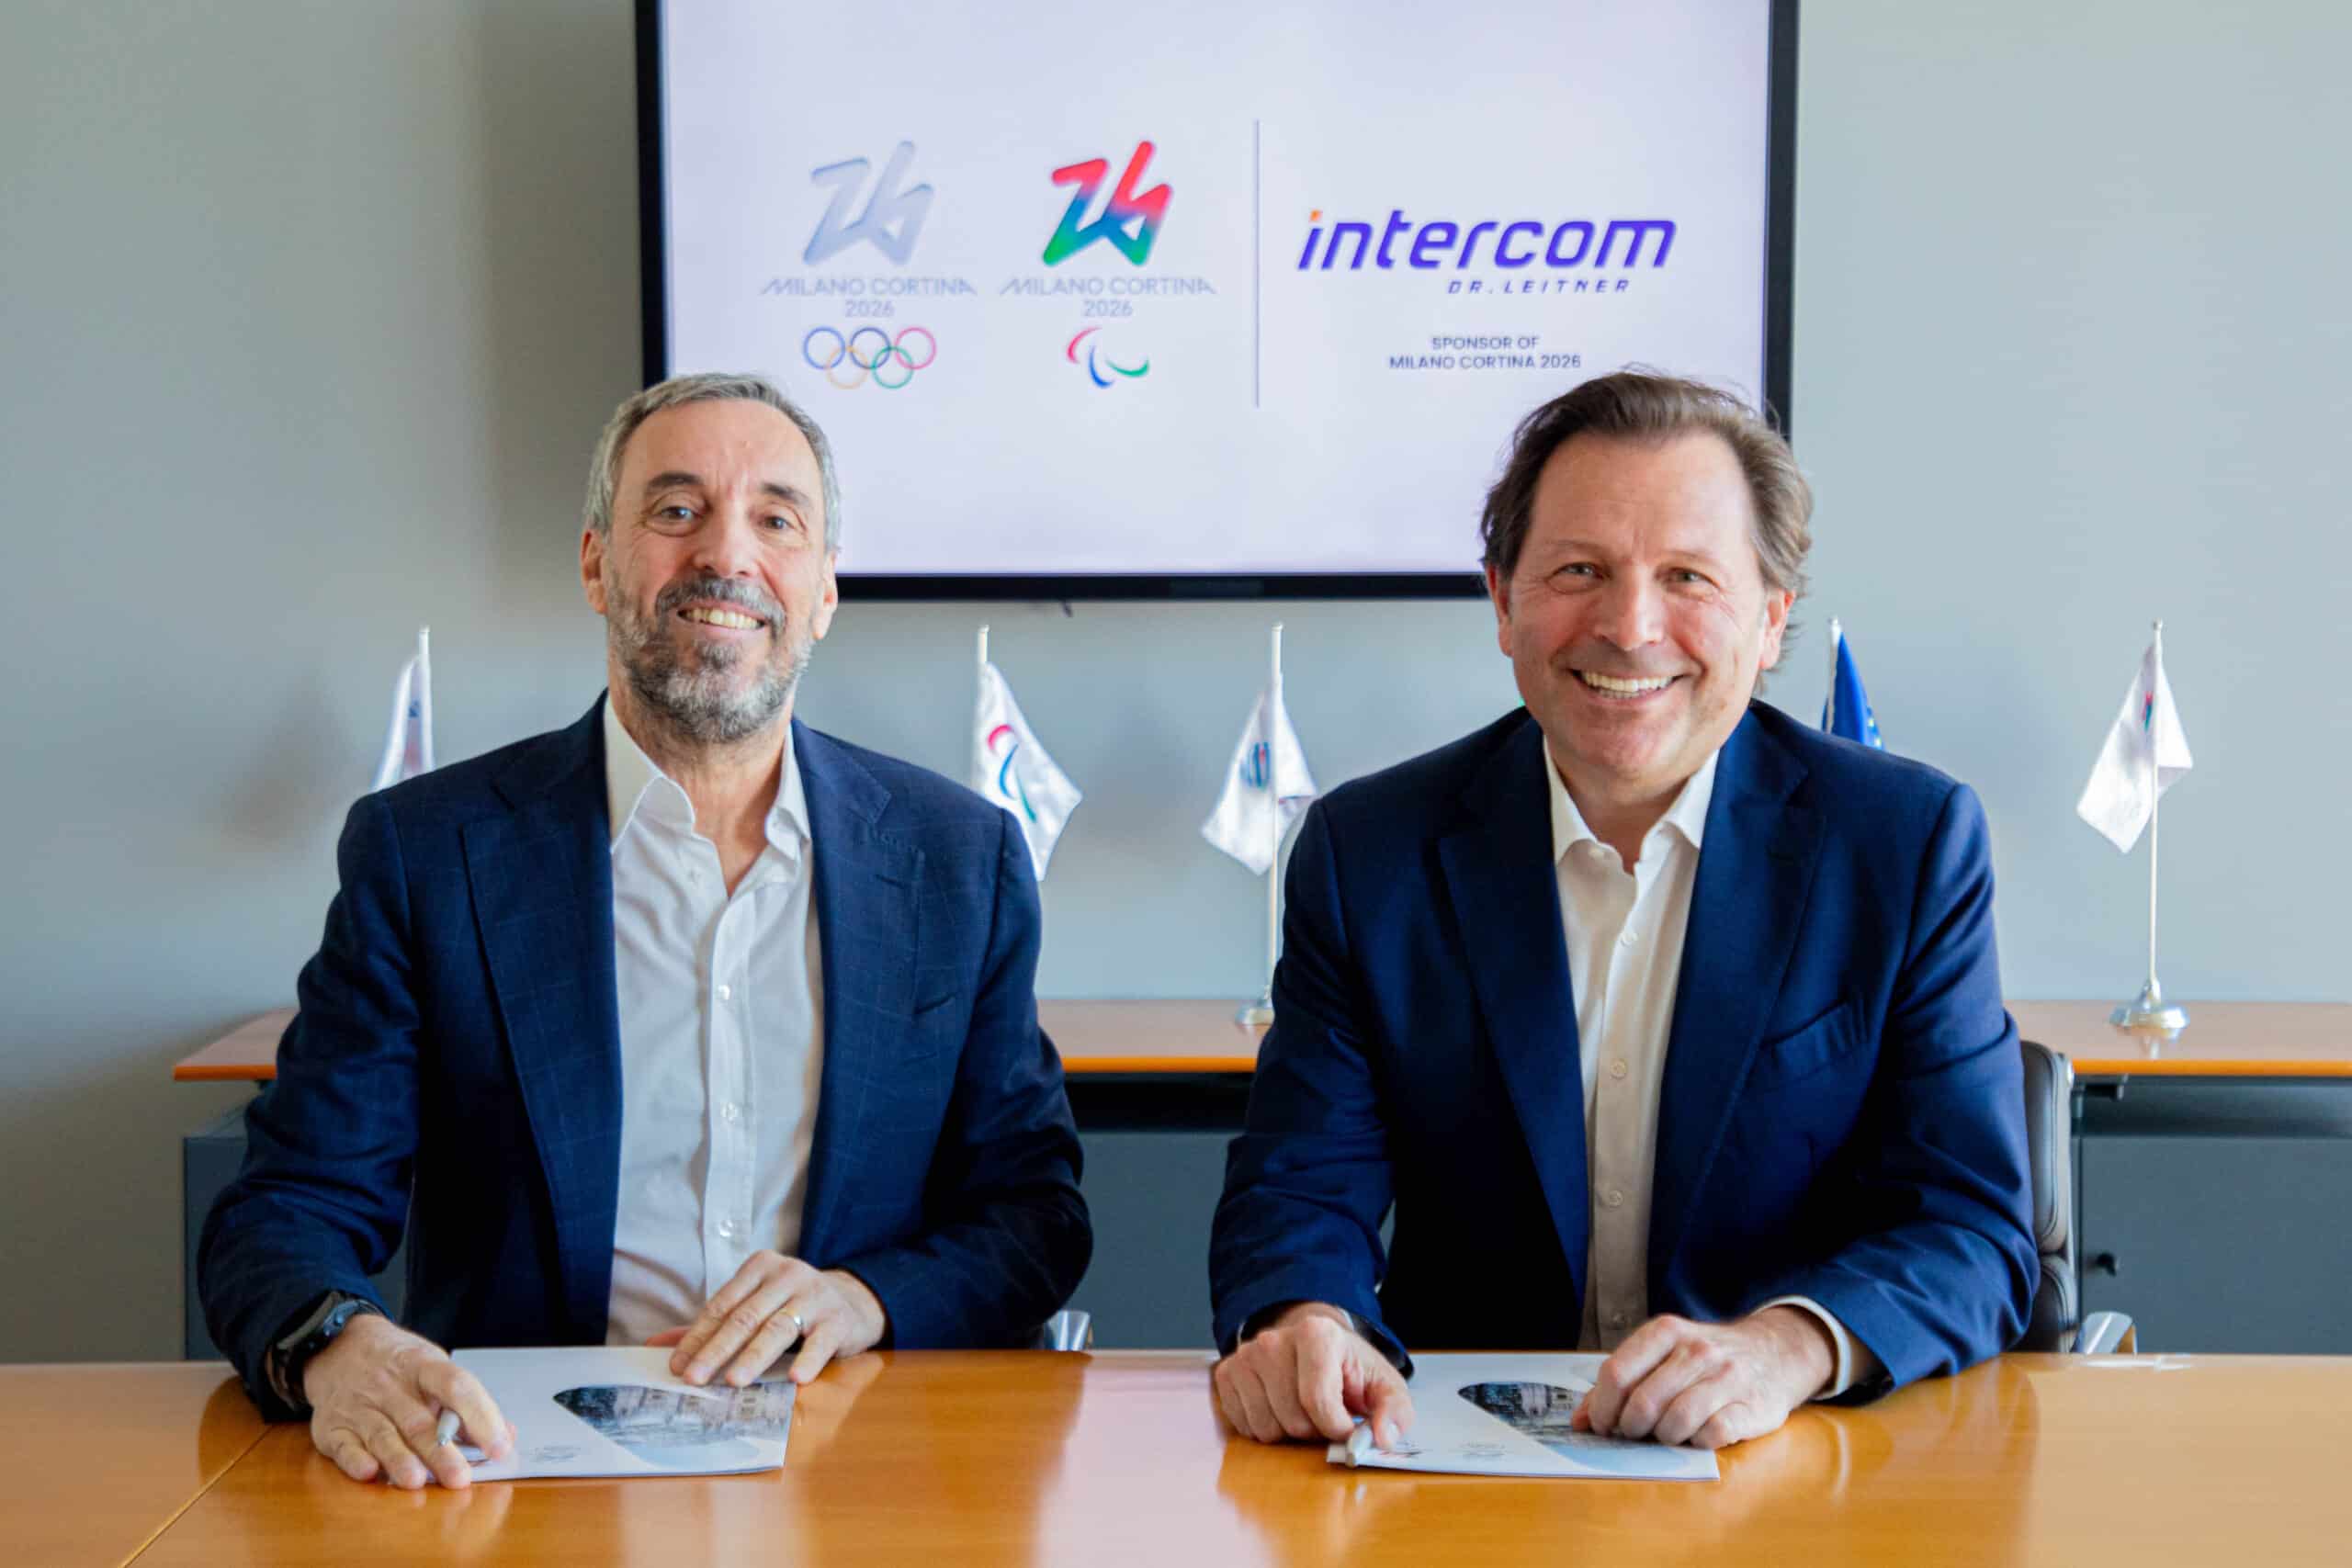 Intercom Dr. Leitner is official sponsor of the Winter Olympics in Milano Cortina 2026